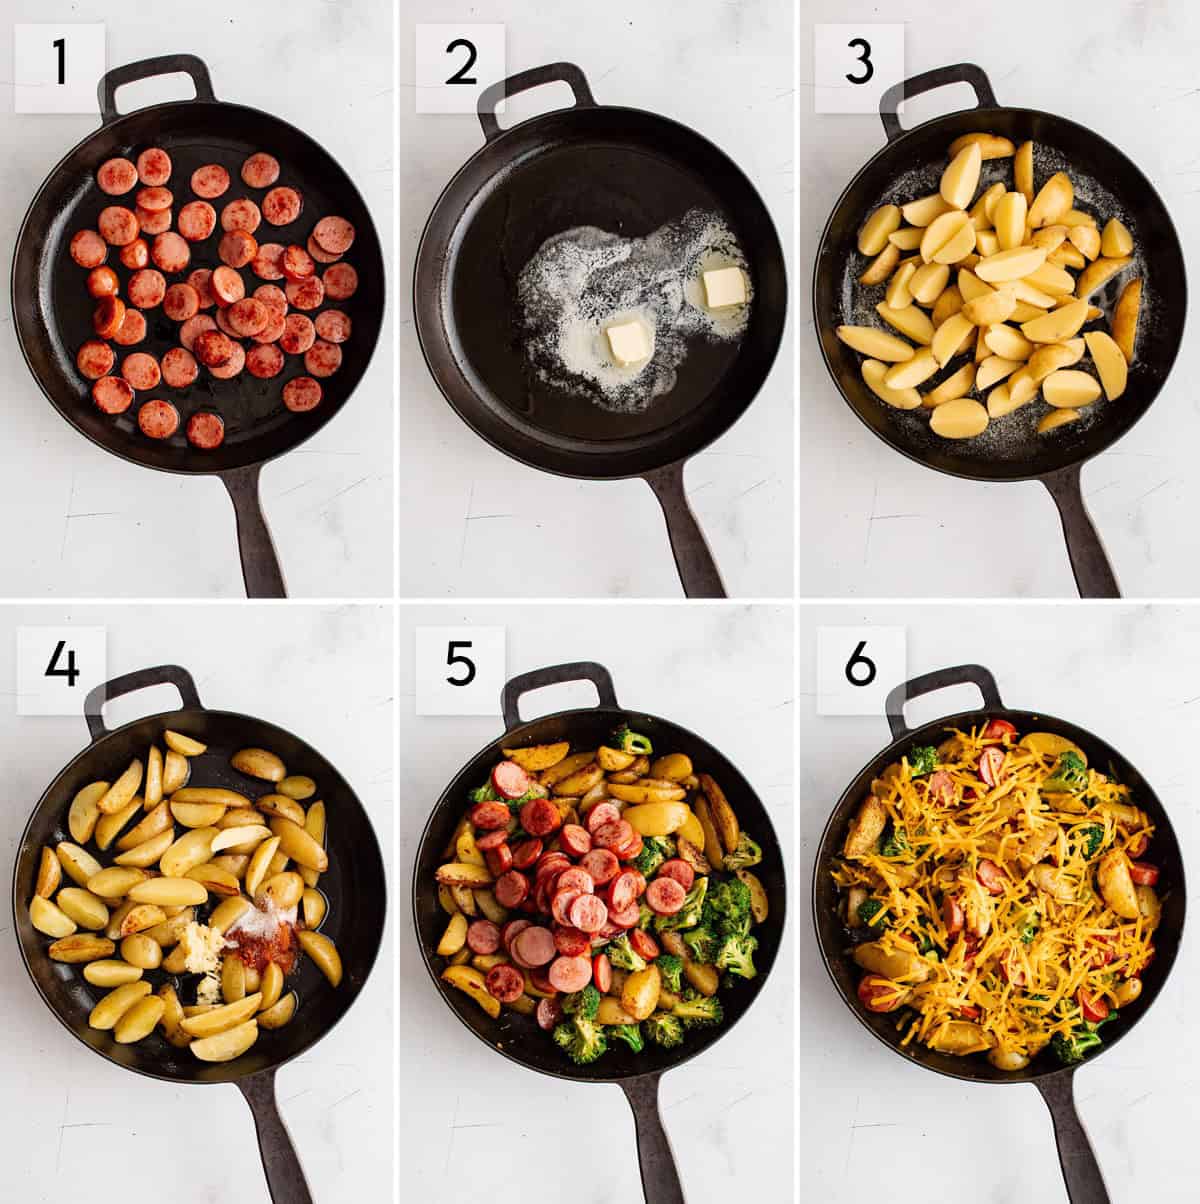 six panel collage image showing the steps of assembling sausage potato broccoli skillet